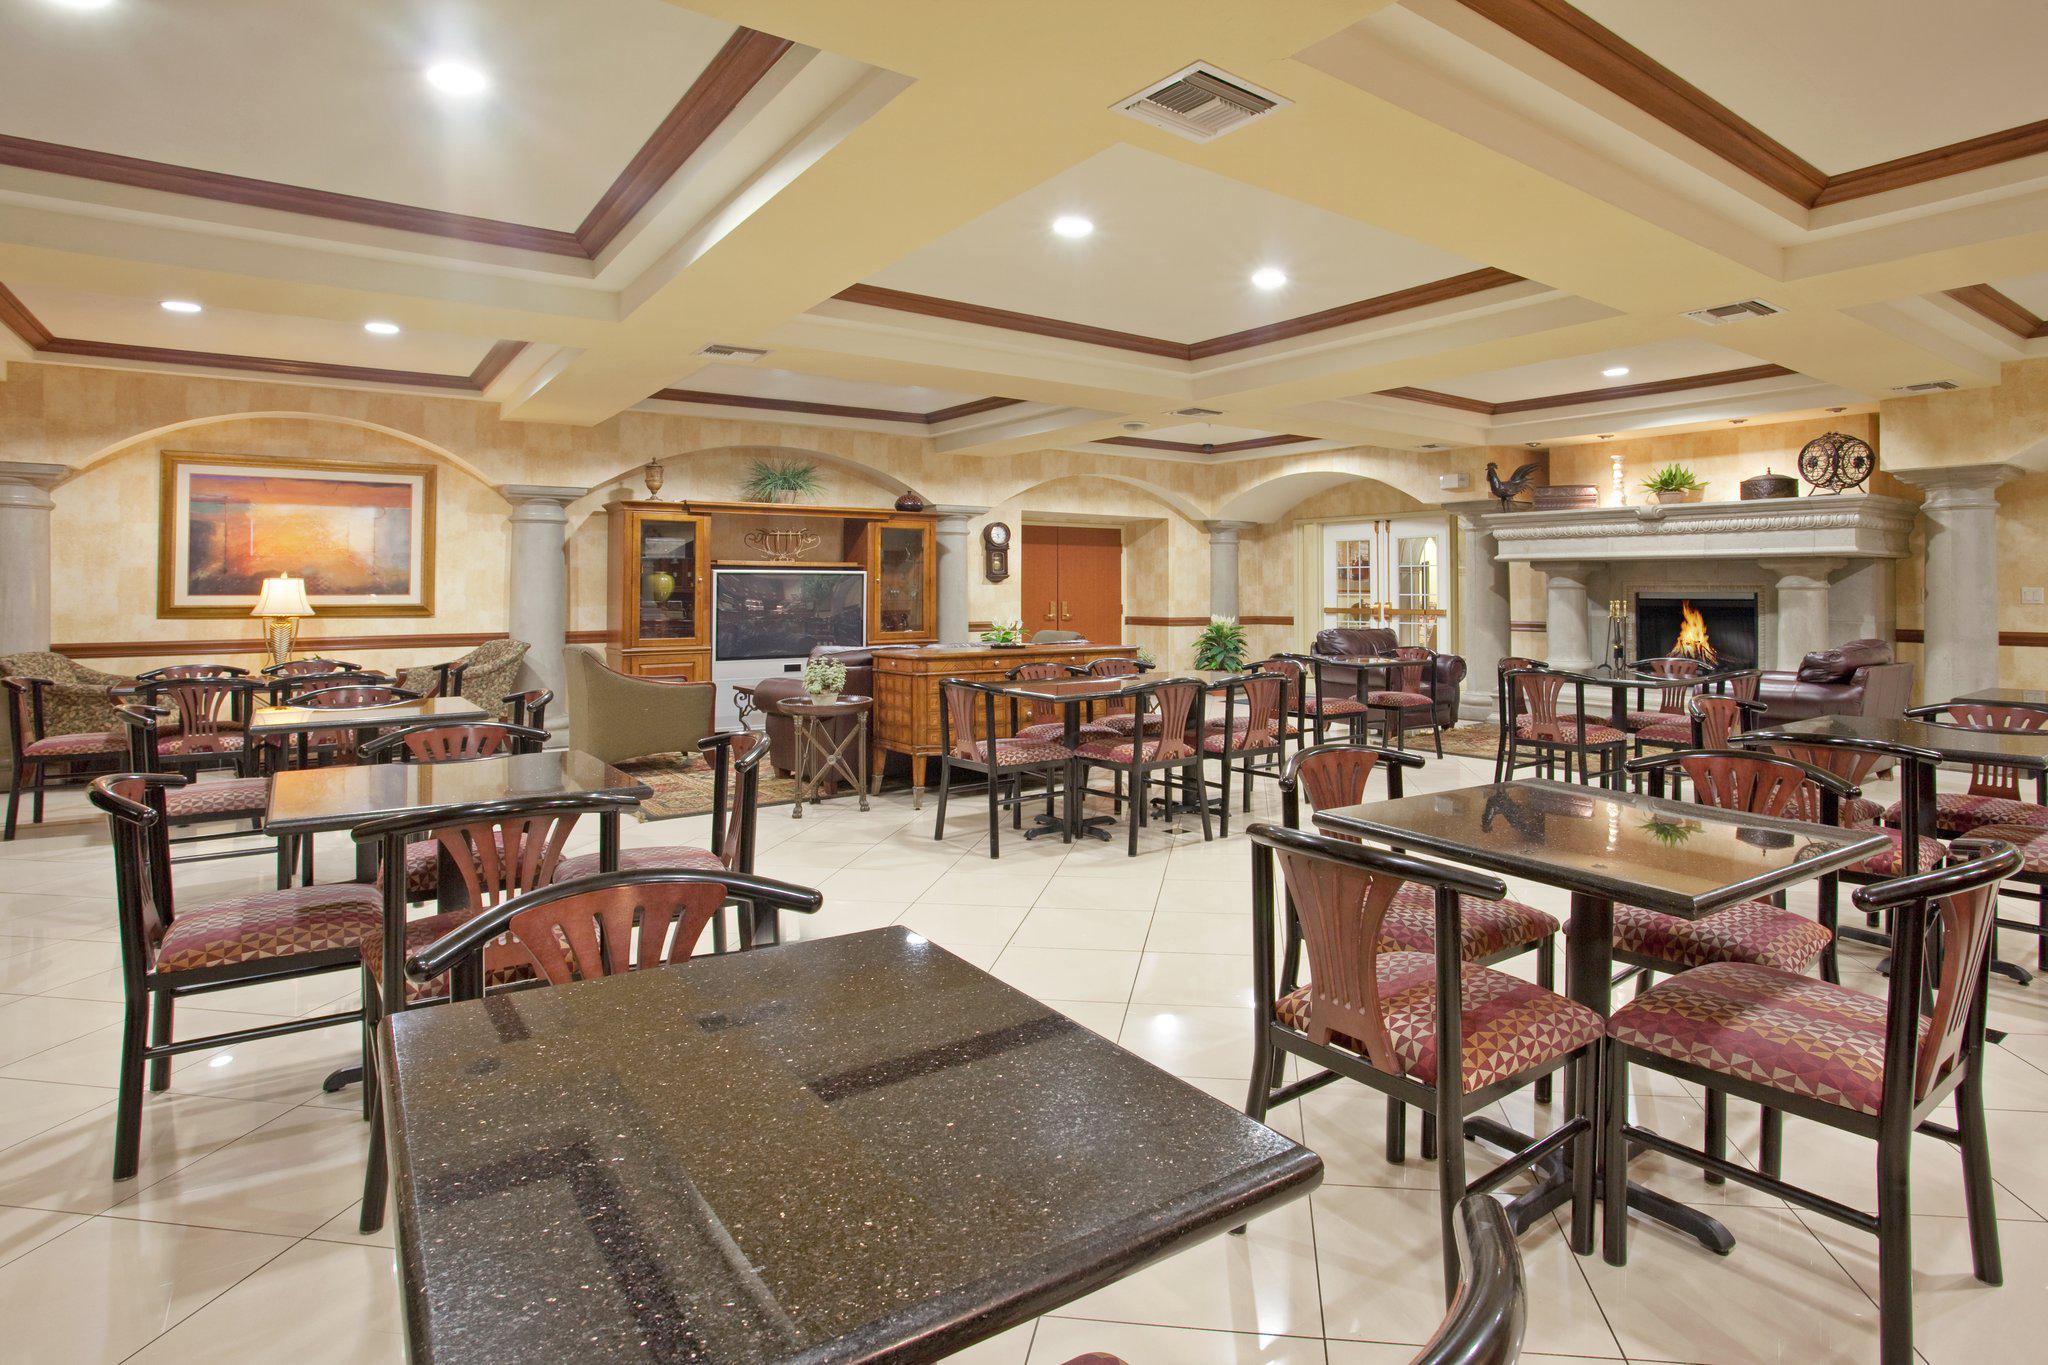 Holiday Inn Express & Suites Tucson Mall Photo